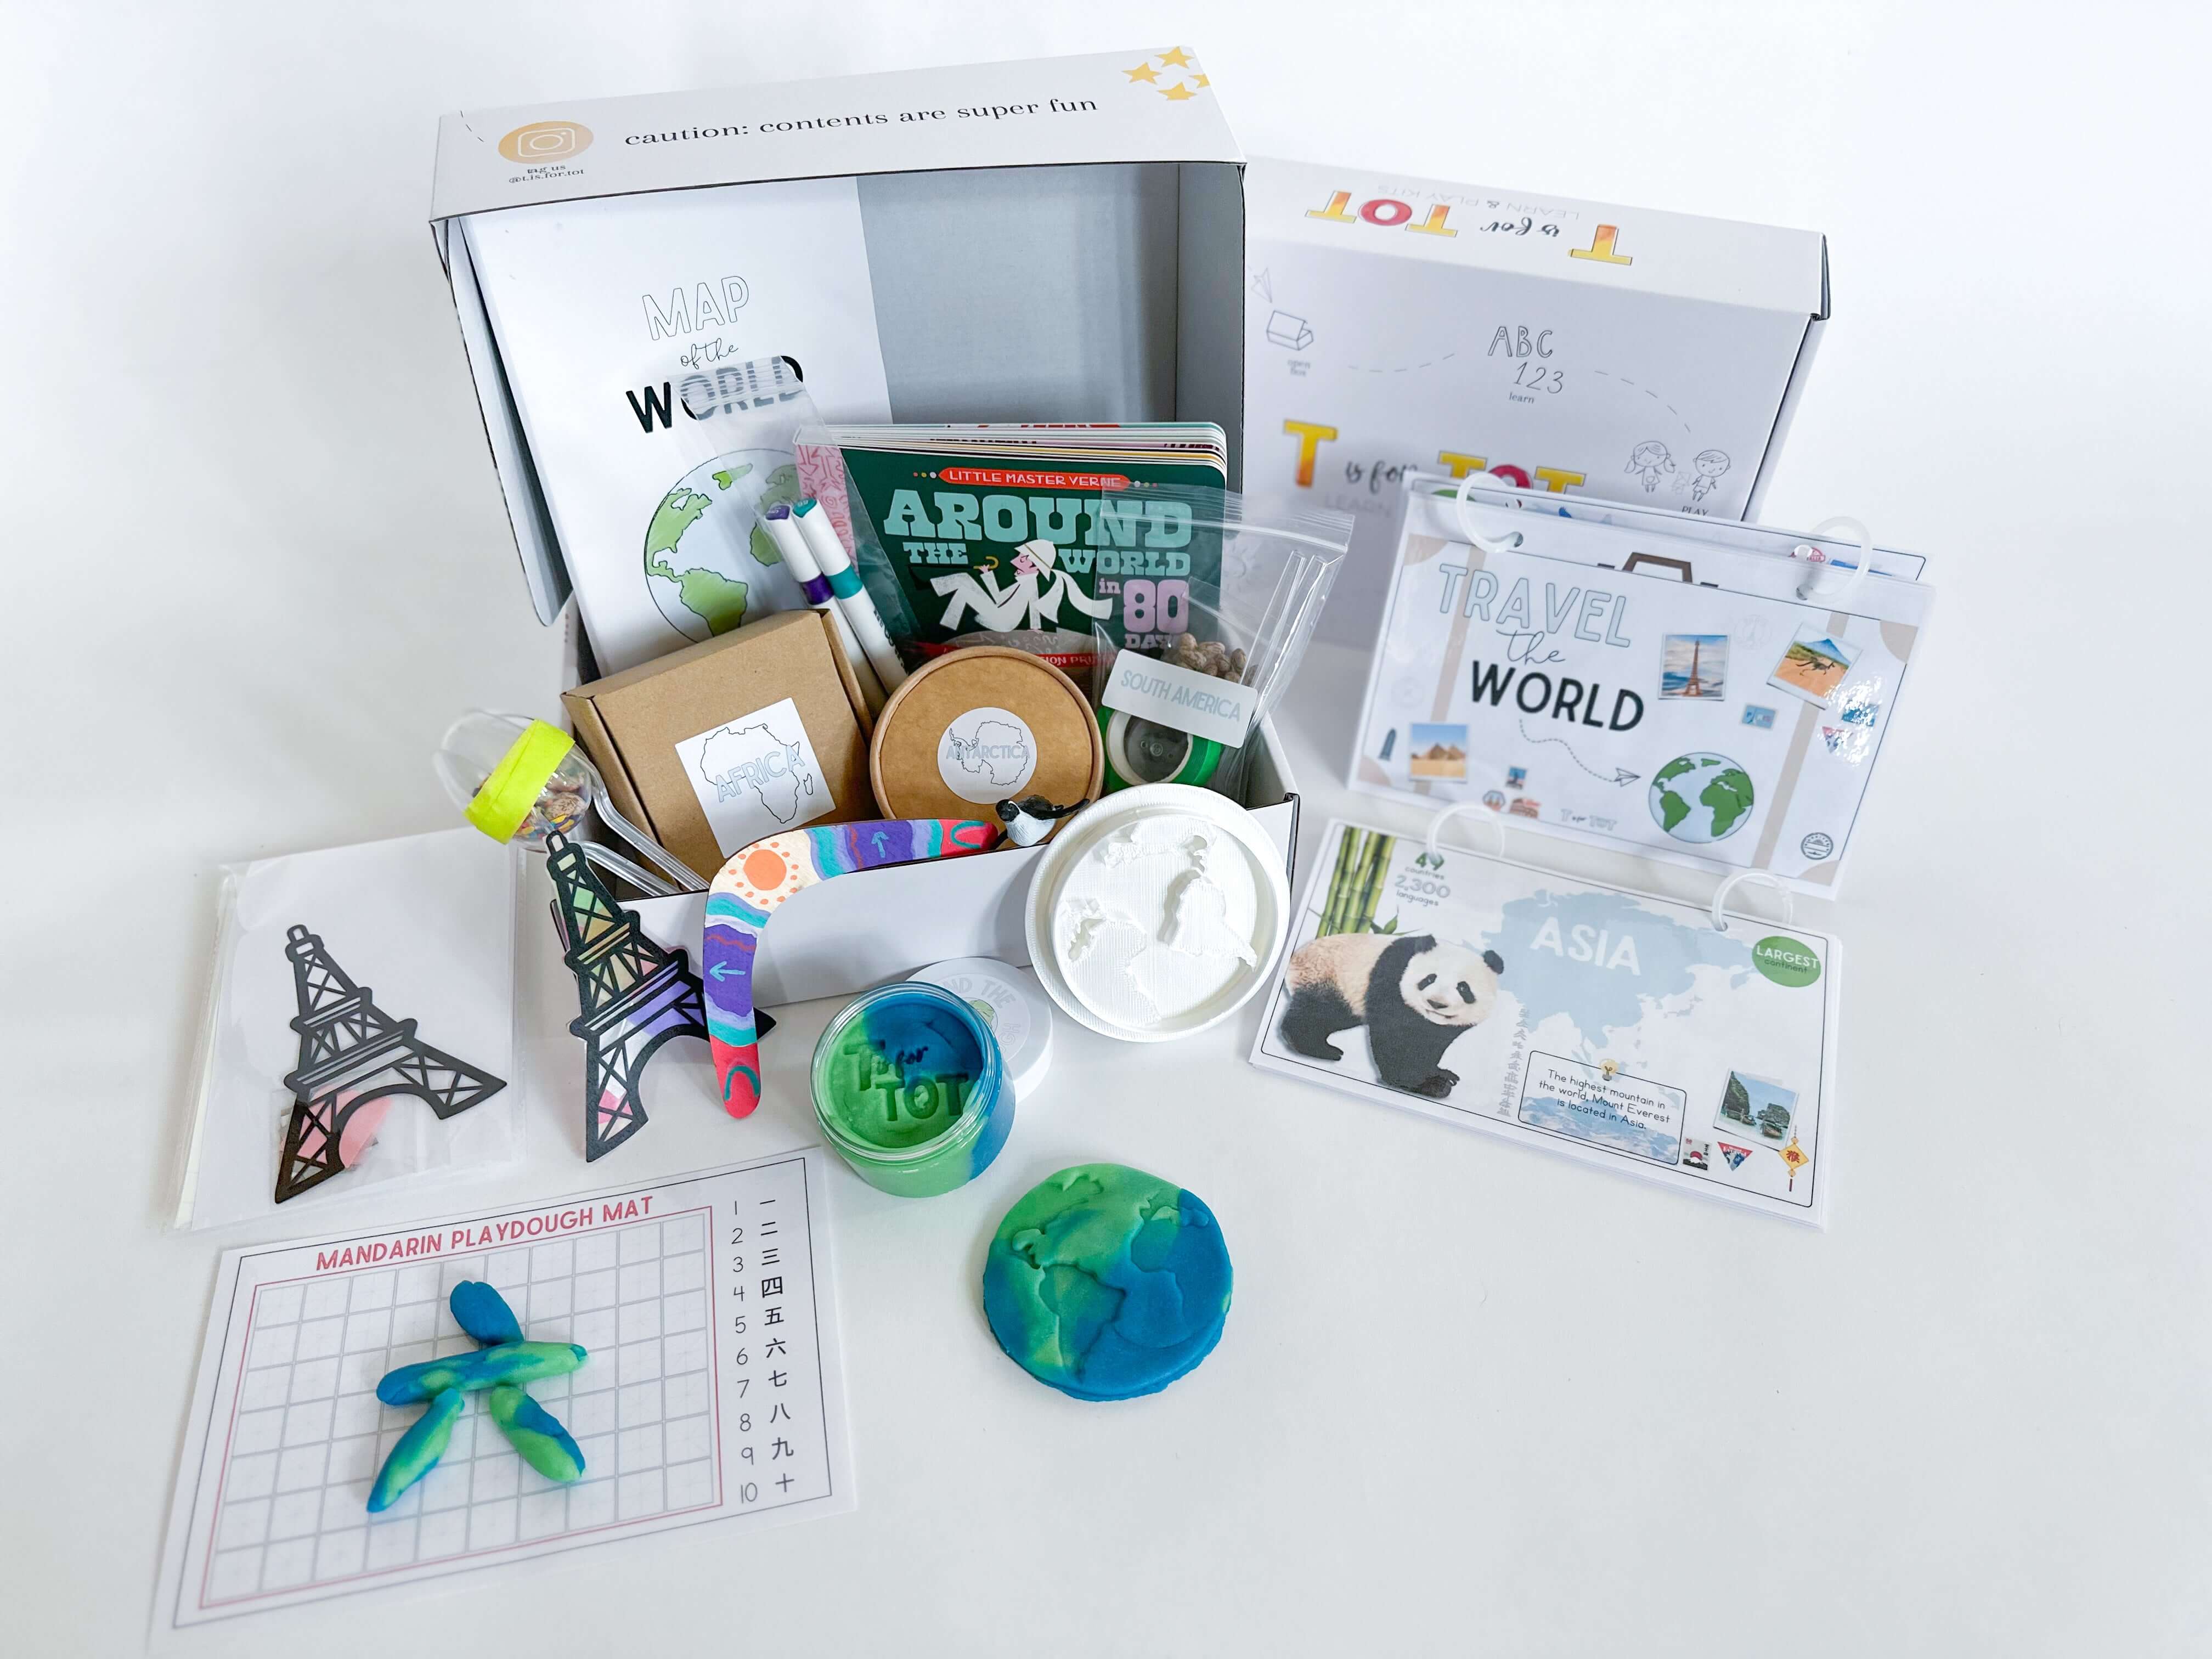 Interactive Around the World play and learn kit for kids. Includes 